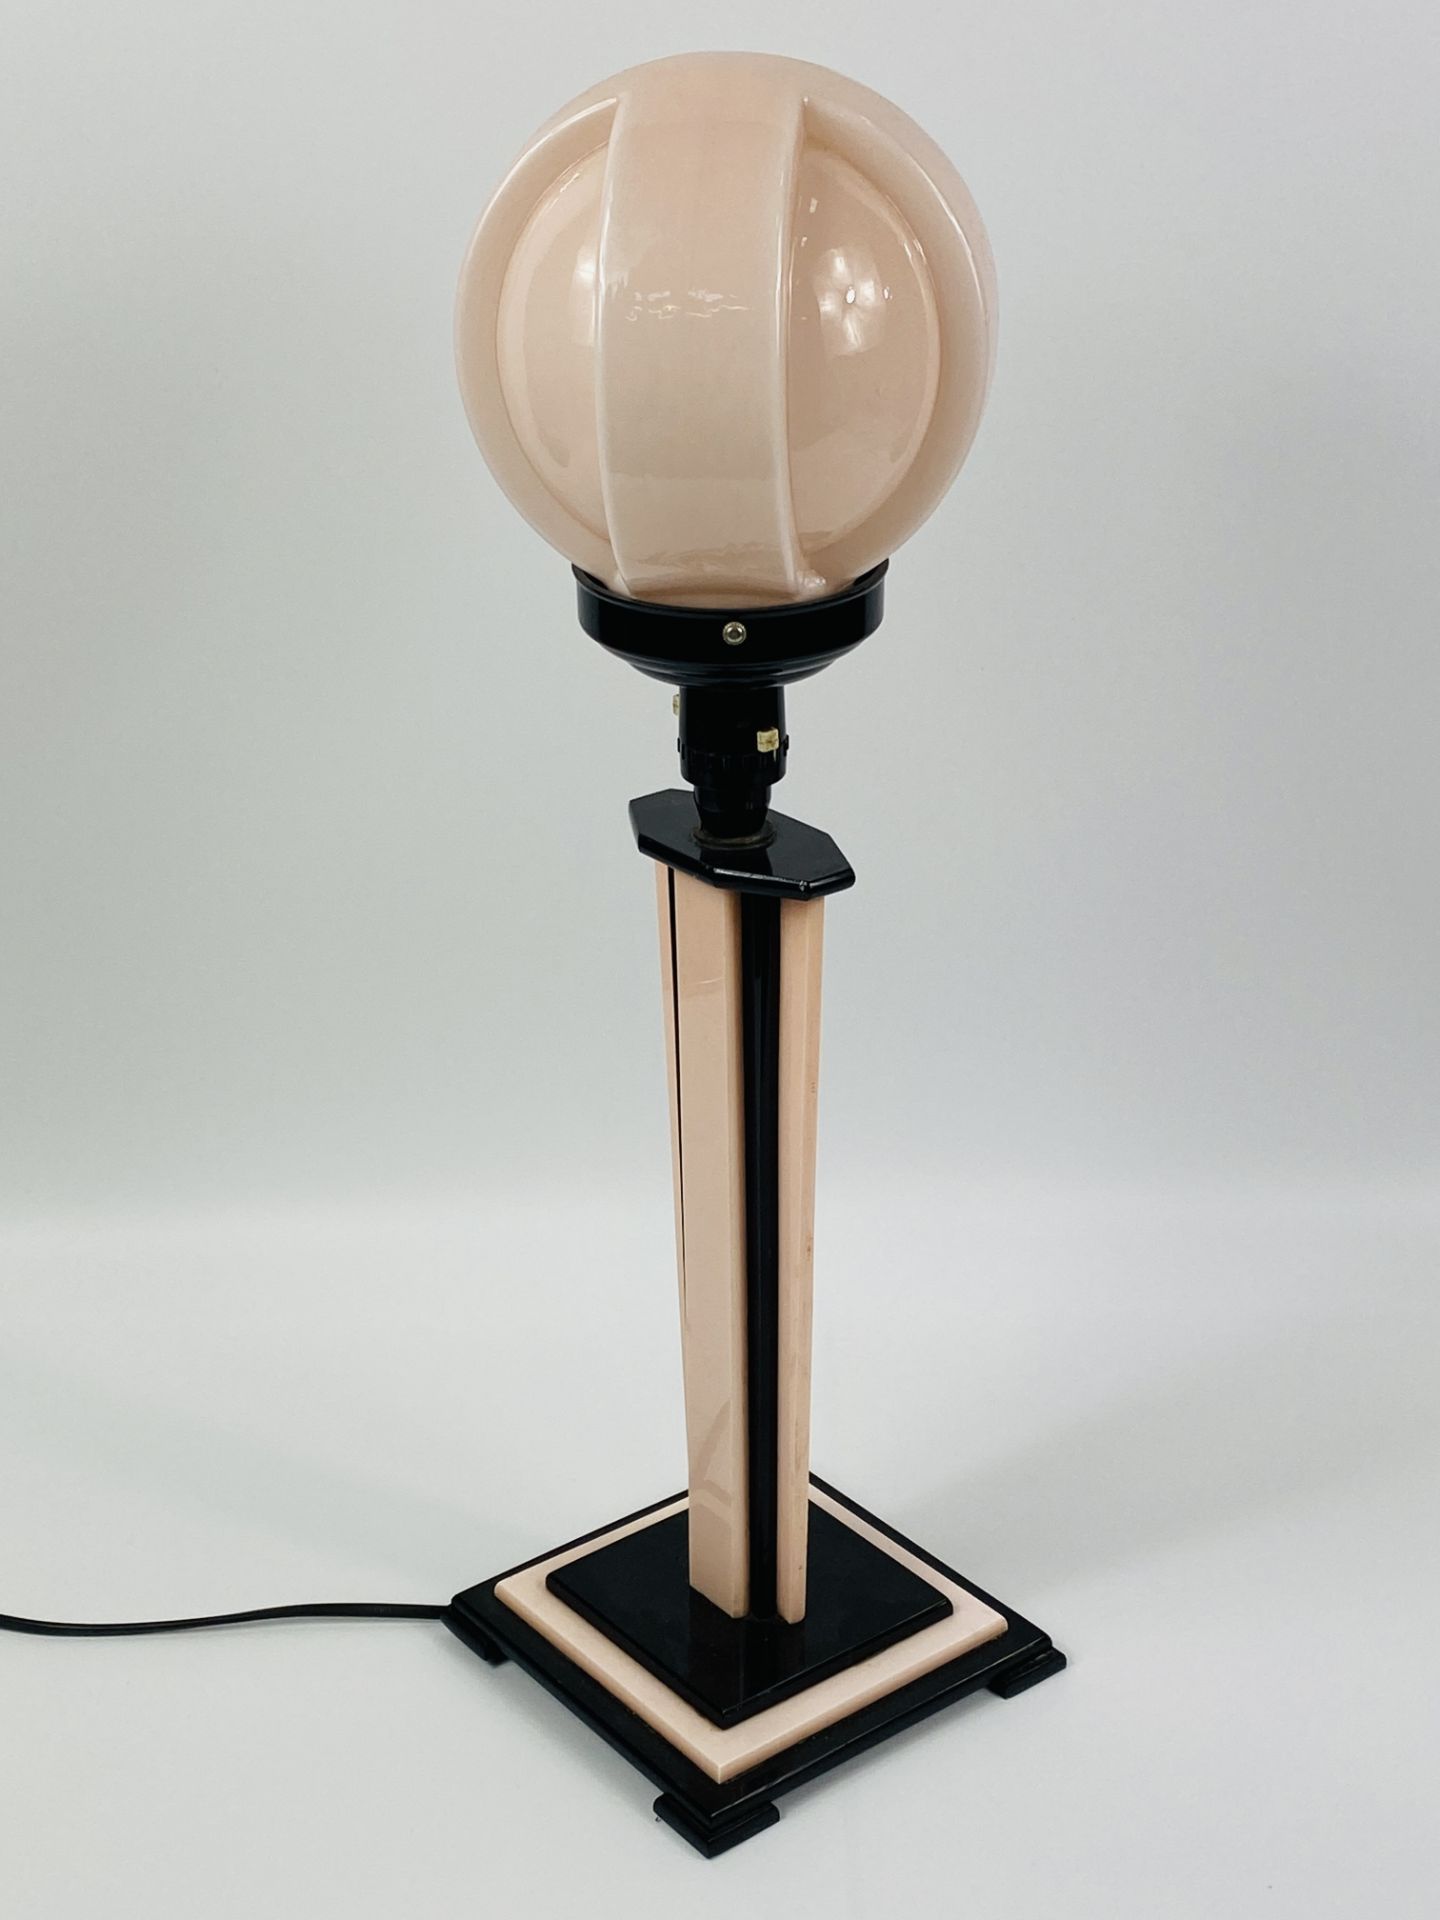 Art deco table lamp - Image 6 of 6